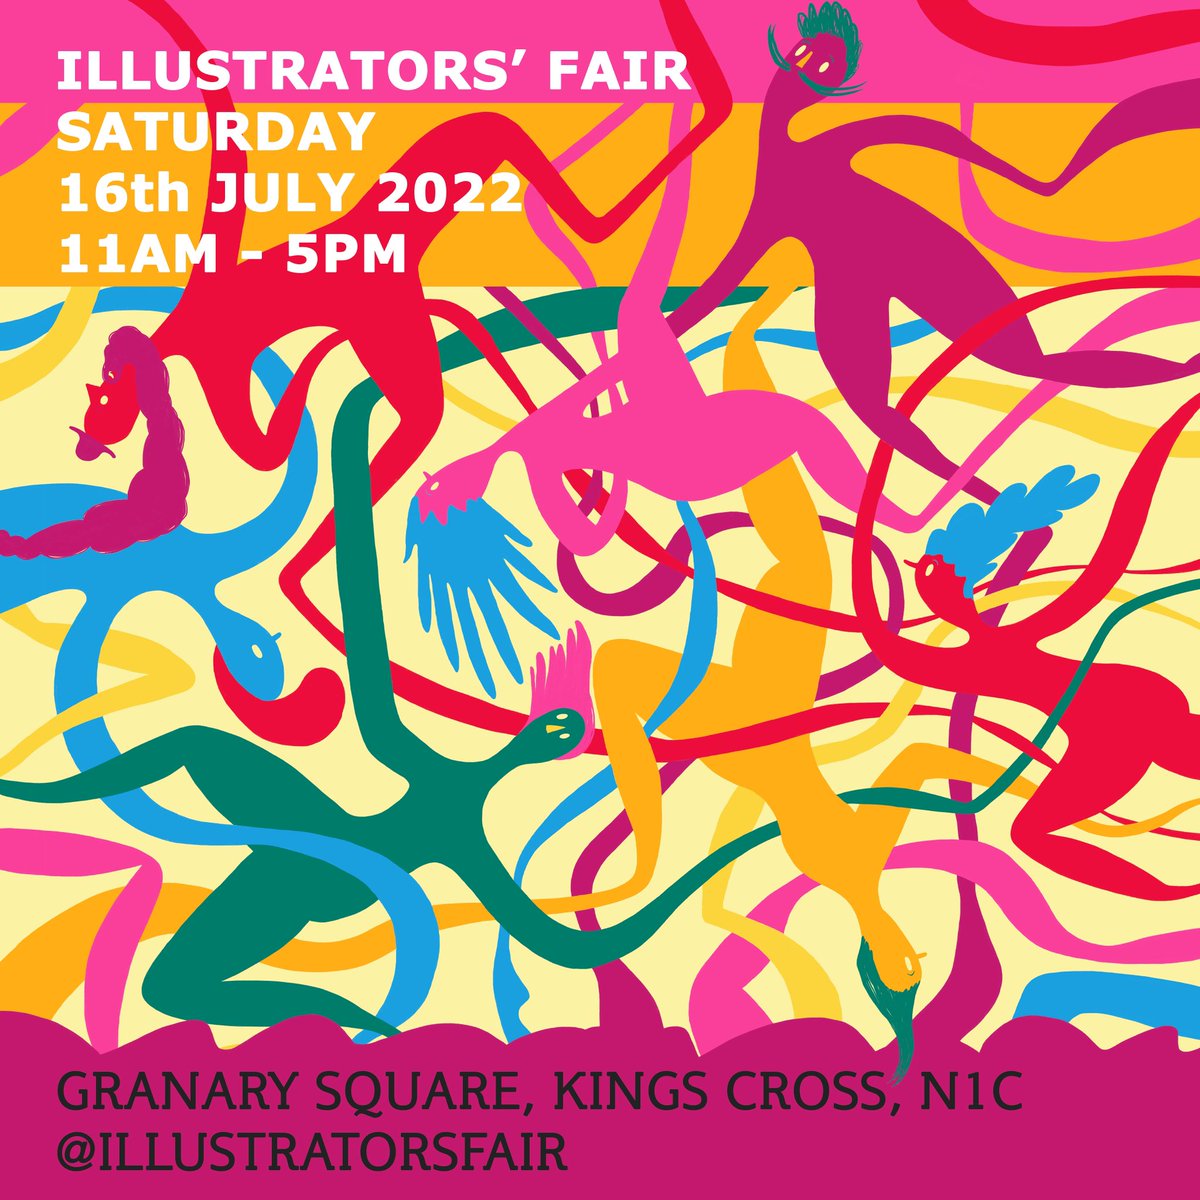 Delighted to be at this years illustrators fair. I’ll have with me my signed Giclee prints, cards, post cards and wrapping paper. Here is my flyer for the event 🙃 looking forward to meeting you all there! #festivalofflyers #illustratorsfair #illustratorsfair22 #kingscrossn1c